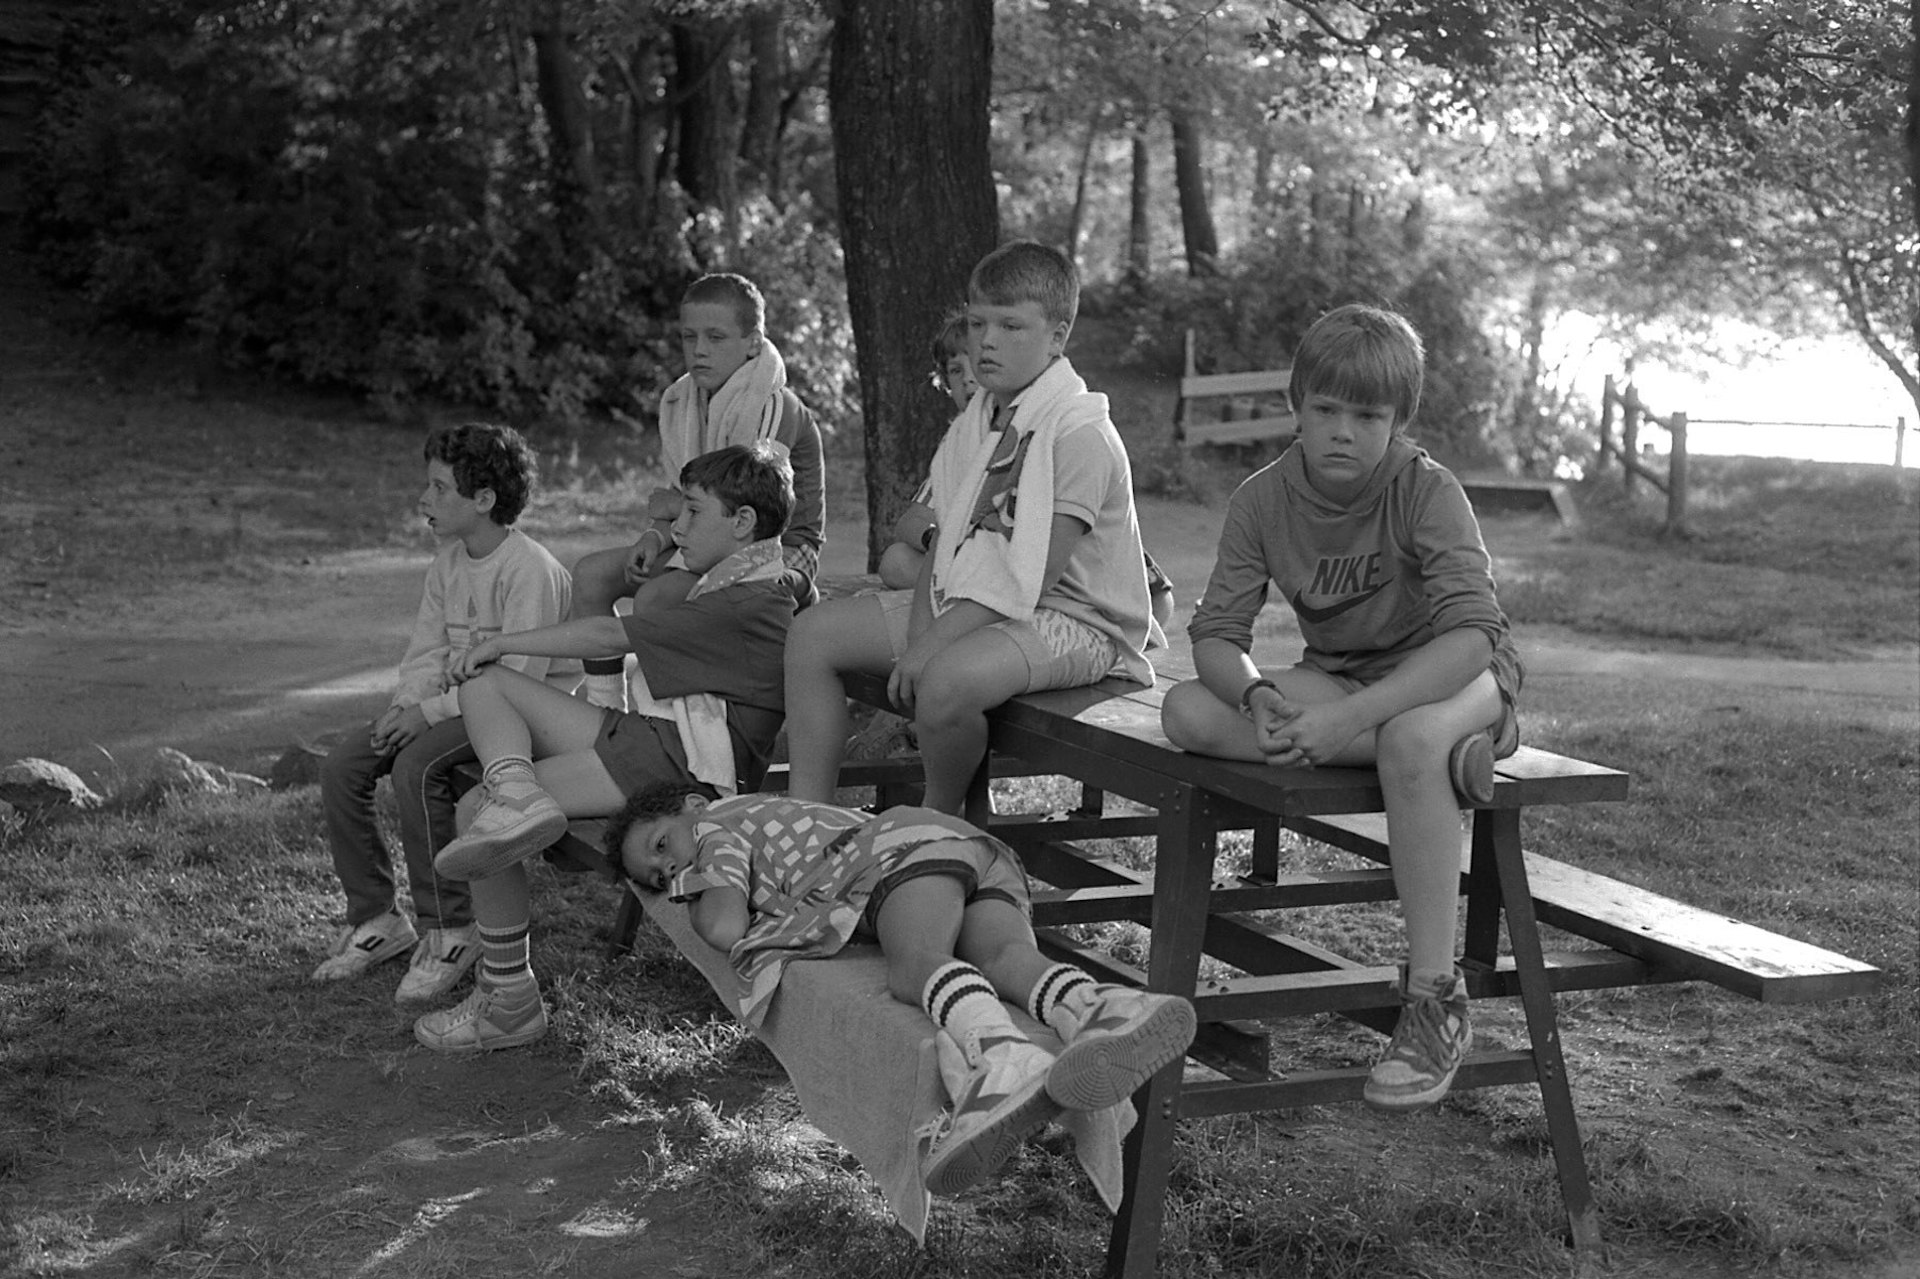 Vintage scenes of life at an American summer camp